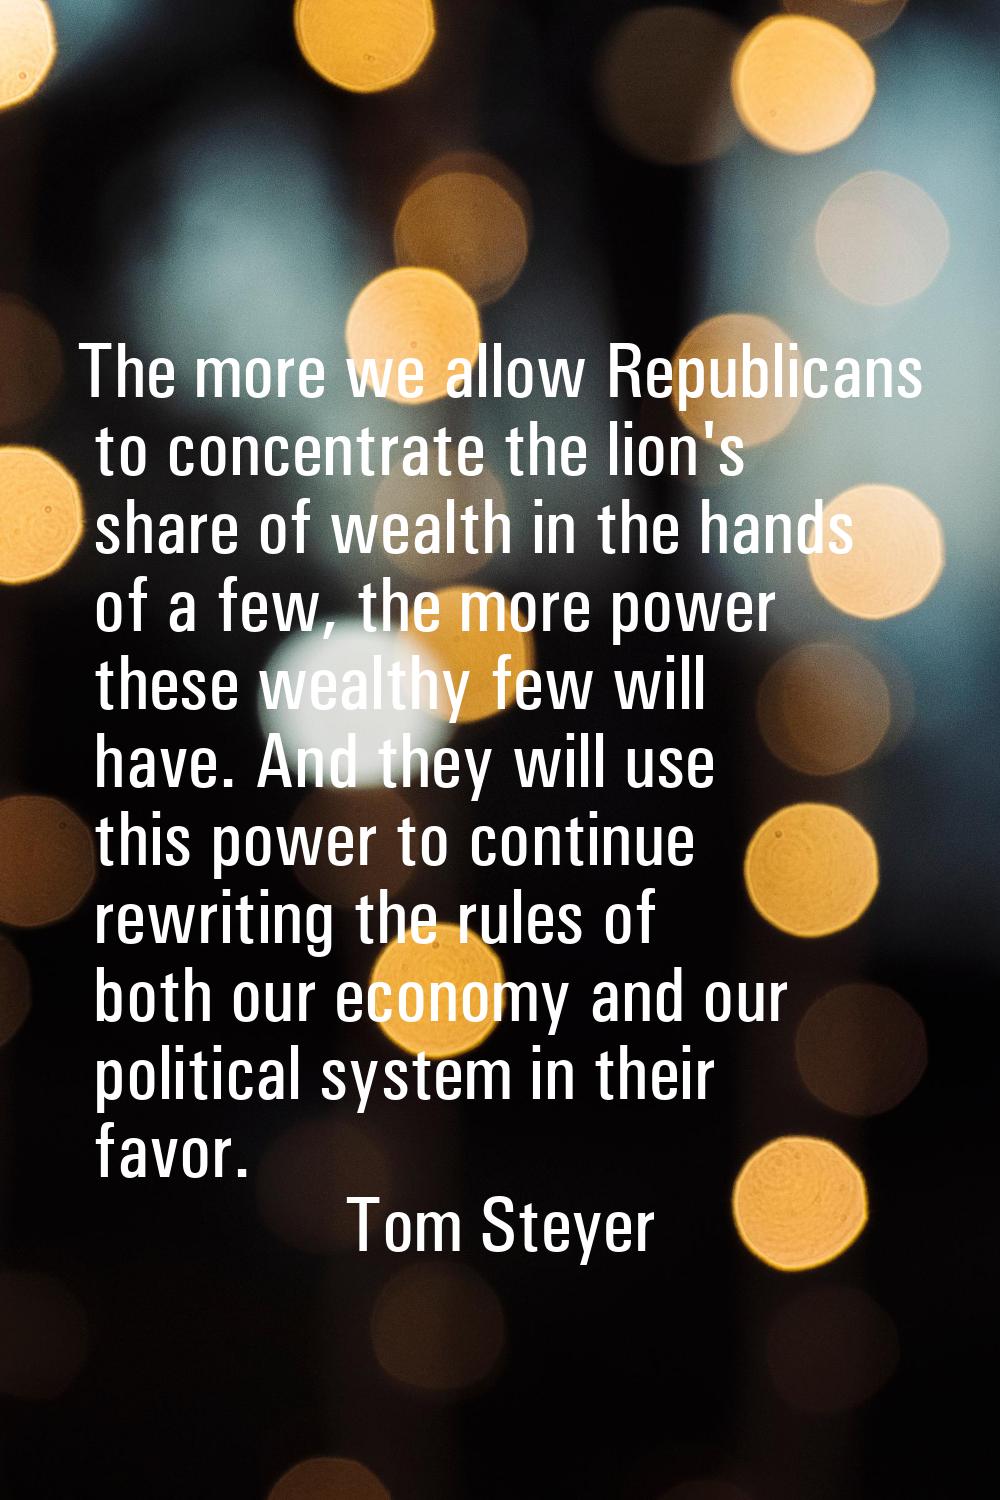 The more we allow Republicans to concentrate the lion's share of wealth in the hands of a few, the 